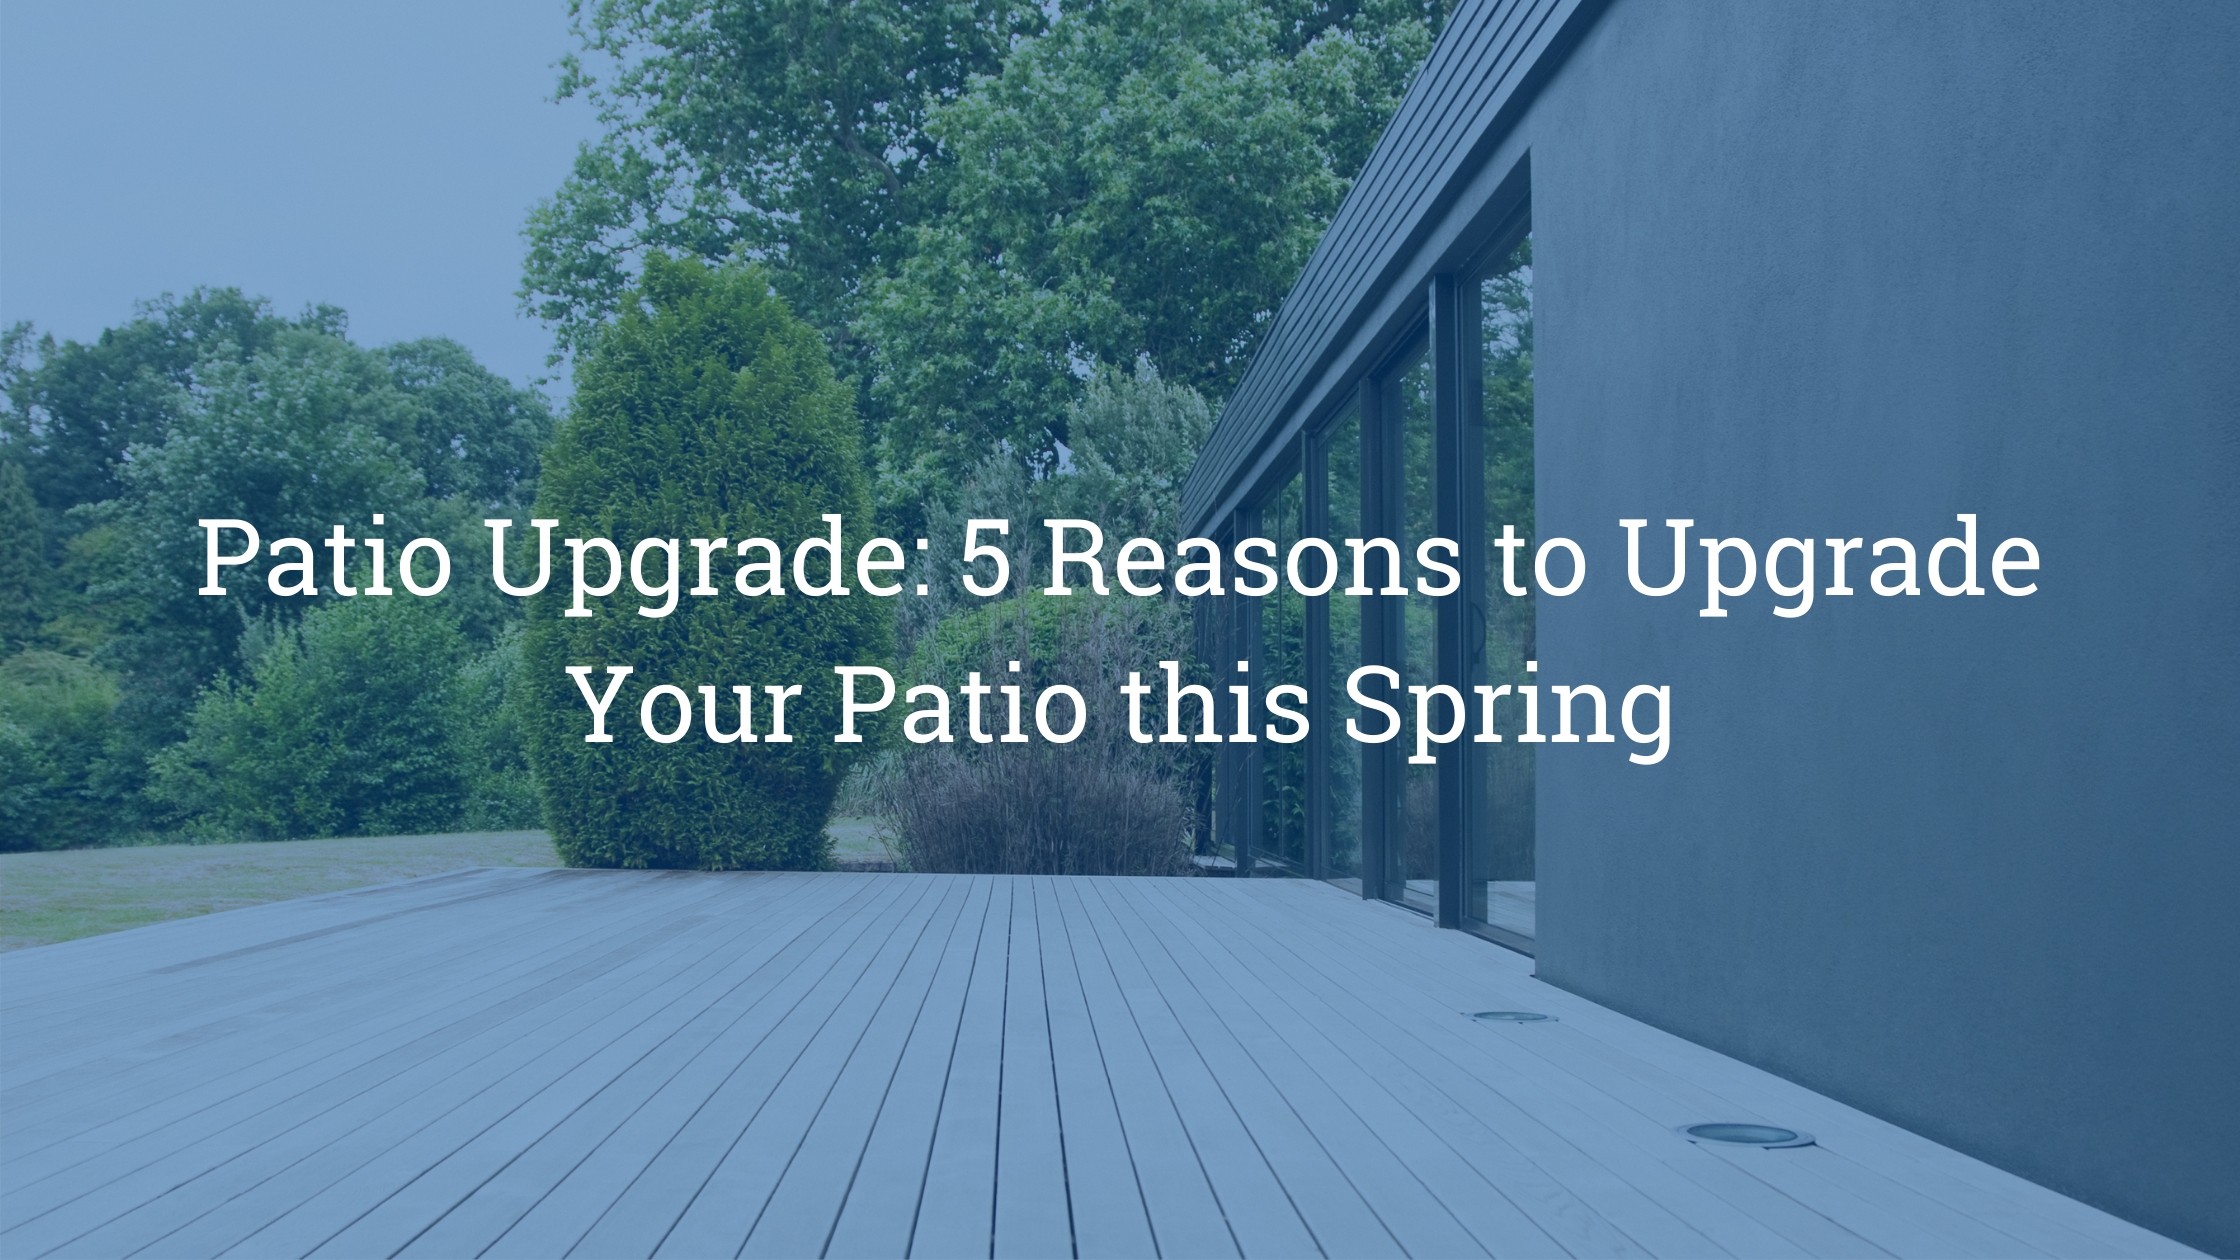 https://handymanconnection.com/wp-content/uploads/2021/05/Patio-Upgrade_-5-Reasons-to-Upgrade-Your-Patio-this-Spring-1.png